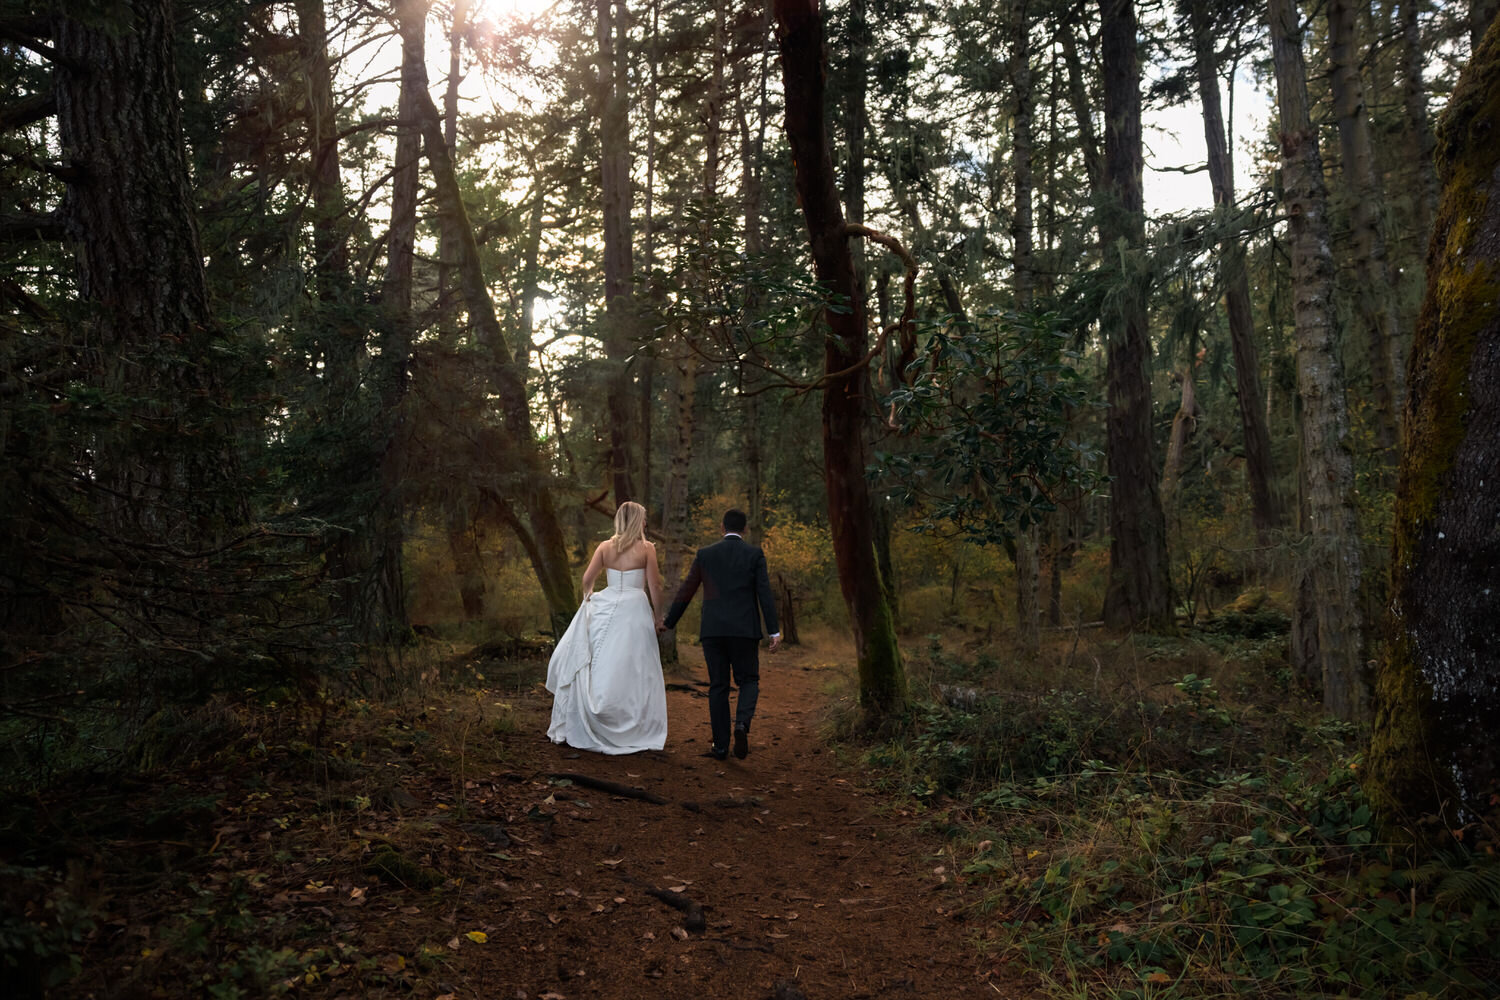 Vancouver Island Adventure Elopement and Small Wedding Photographer - Allie Knull's Photography-52.jpg